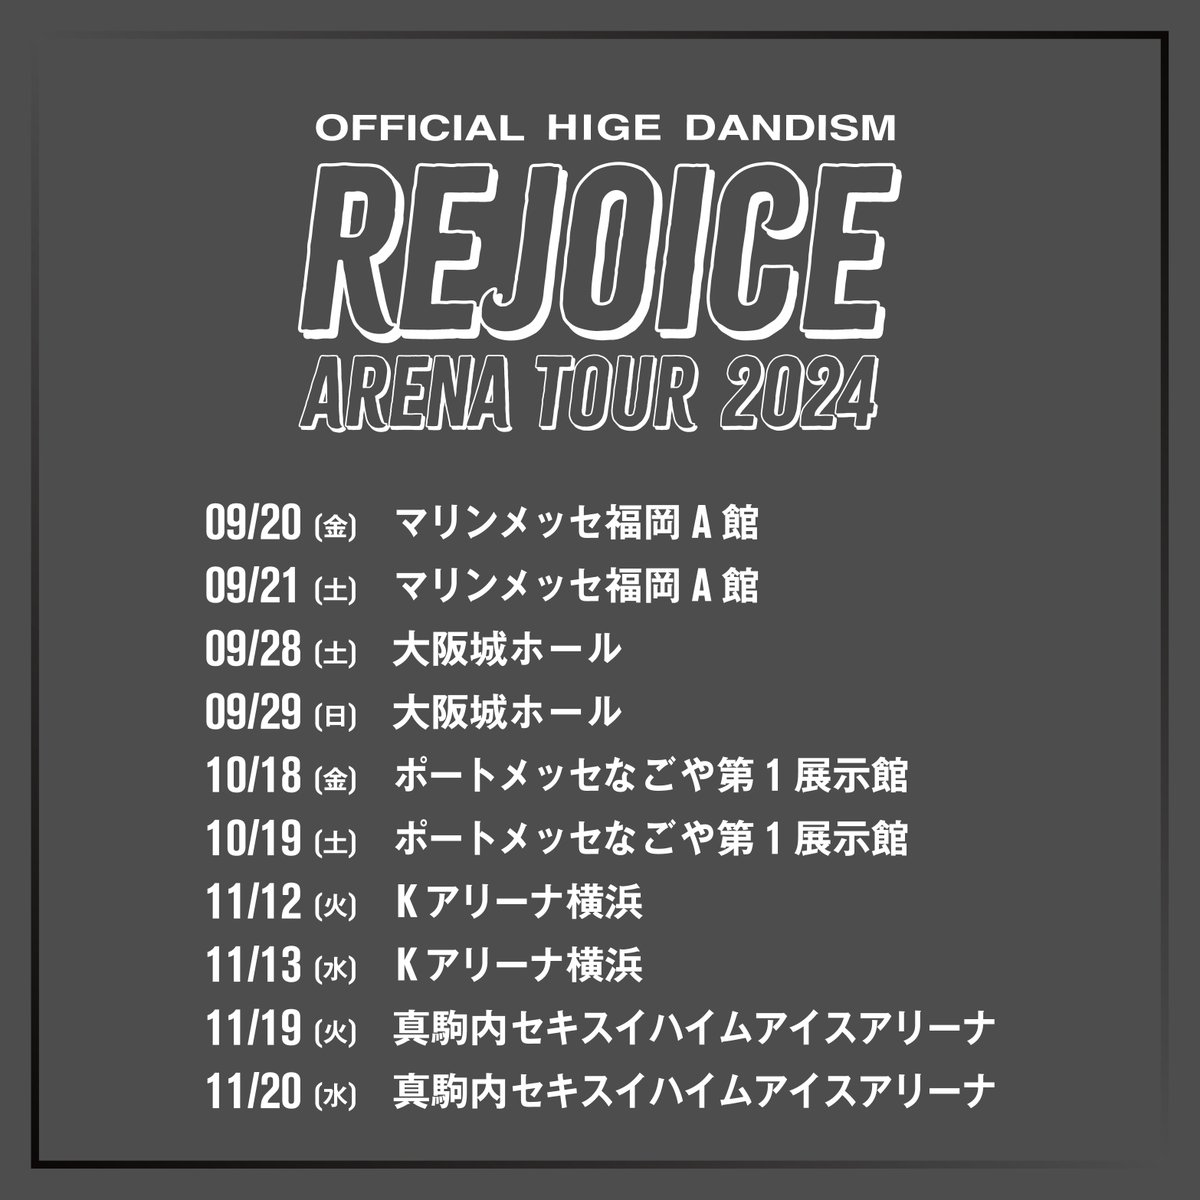 OFFICIAL HIGE DANDISM
 Arena Tour 2024 - Rejoice -

2024年9月より
全国アリーナツアー開催決定！

🎫明日12:00よりW会員先行スタート

公演の詳細やチケット情報は
特設サイトをご覧ください。

▼特設サイト
event.higedan.com/feature/live_2…

#ヒゲダンアリーナツアー